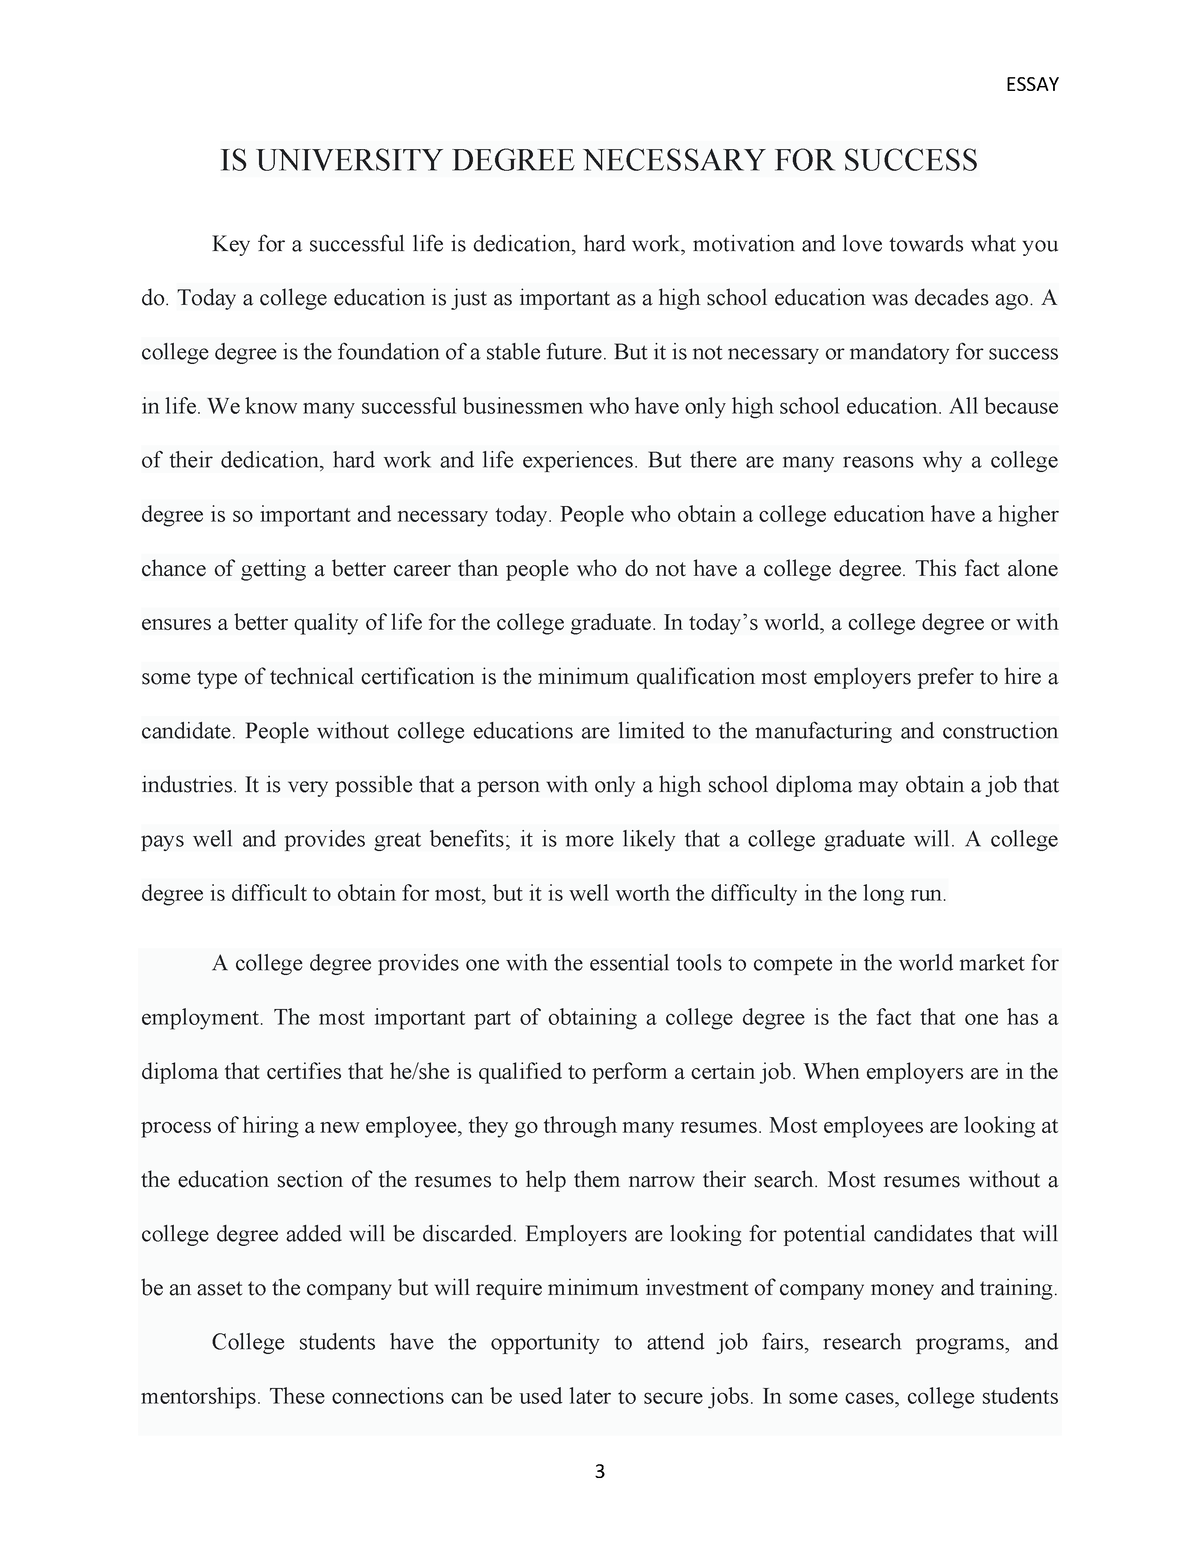 essay on university degree is it necessary for success